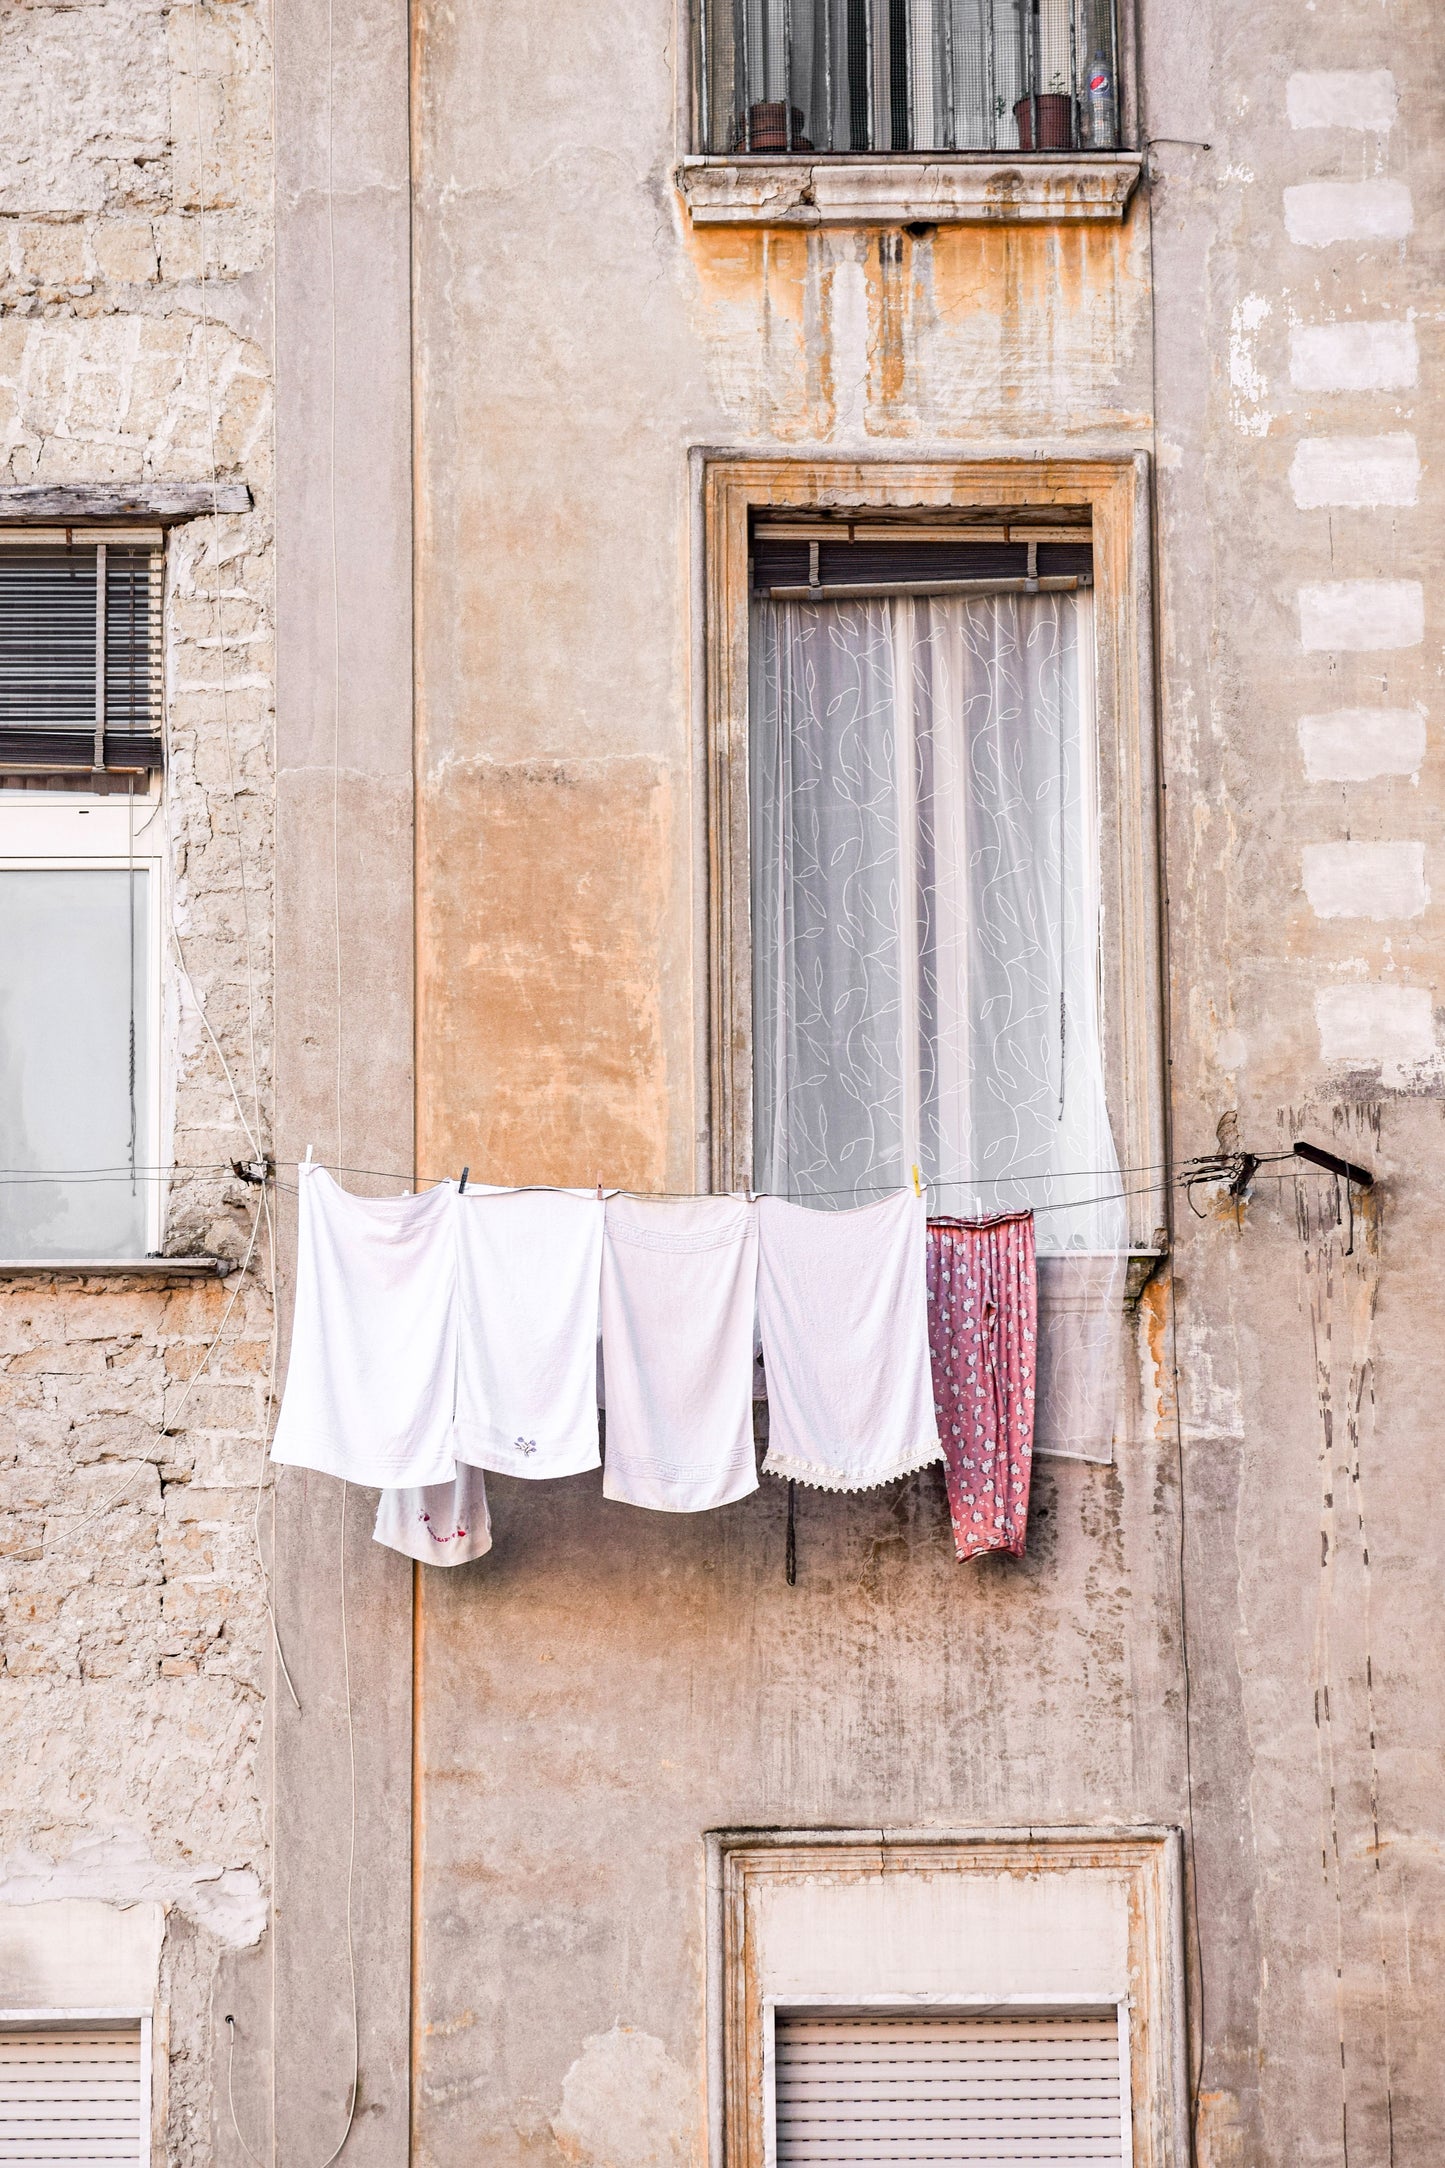 Laundry drying in Naples photography